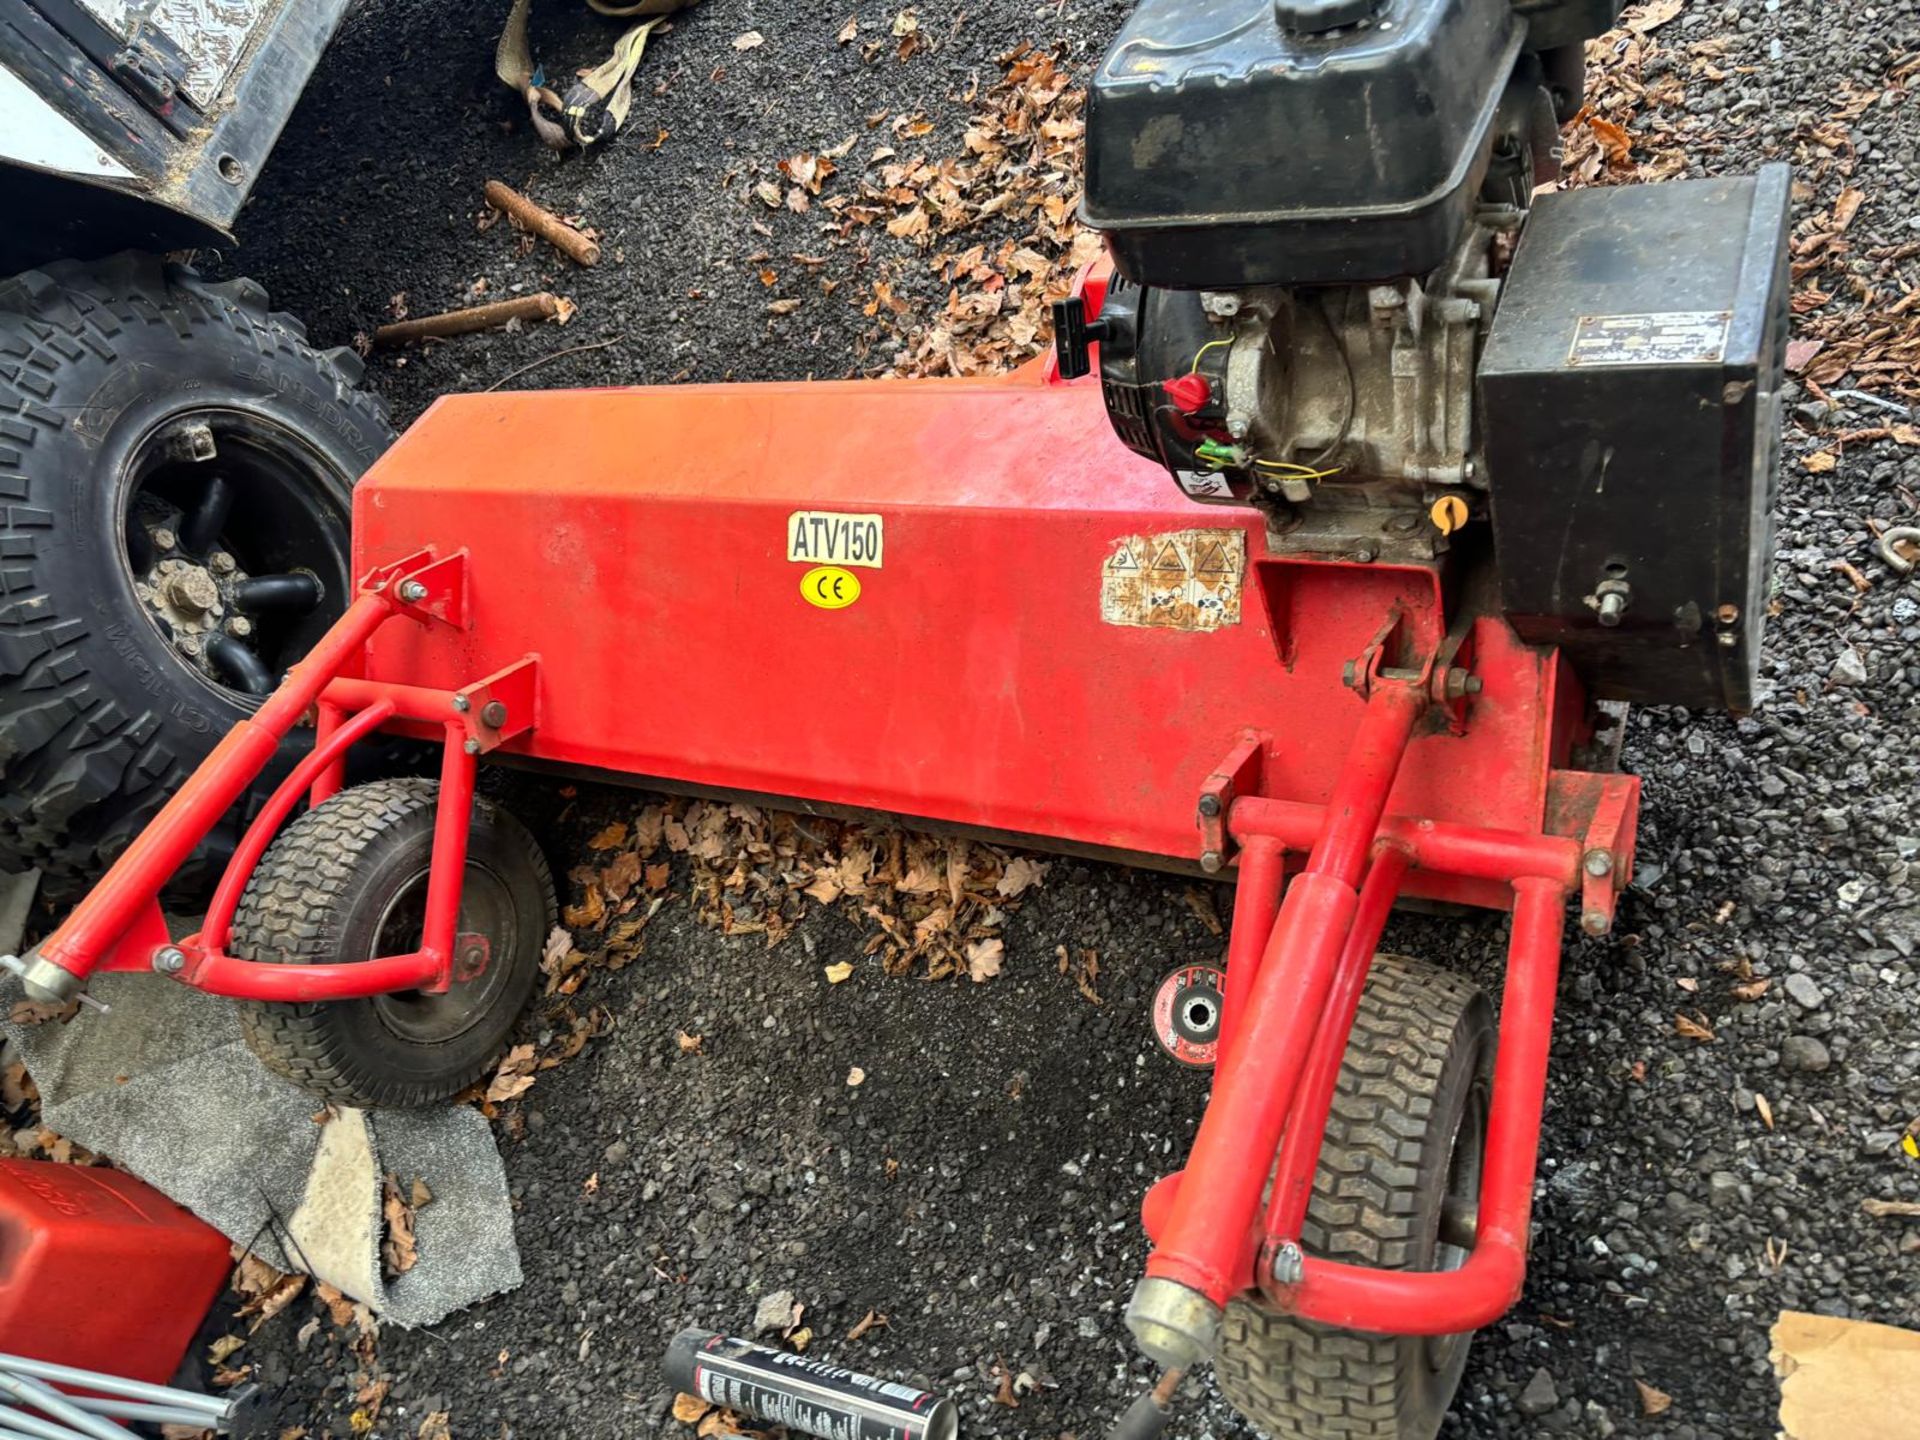 HIGH-PERFORMANCE ATV QUAD BIKE FLAIL MOWER: 4.5FT WIDE, 420CC ENGINE - EXCELLENT CONDITION! - Image 4 of 7